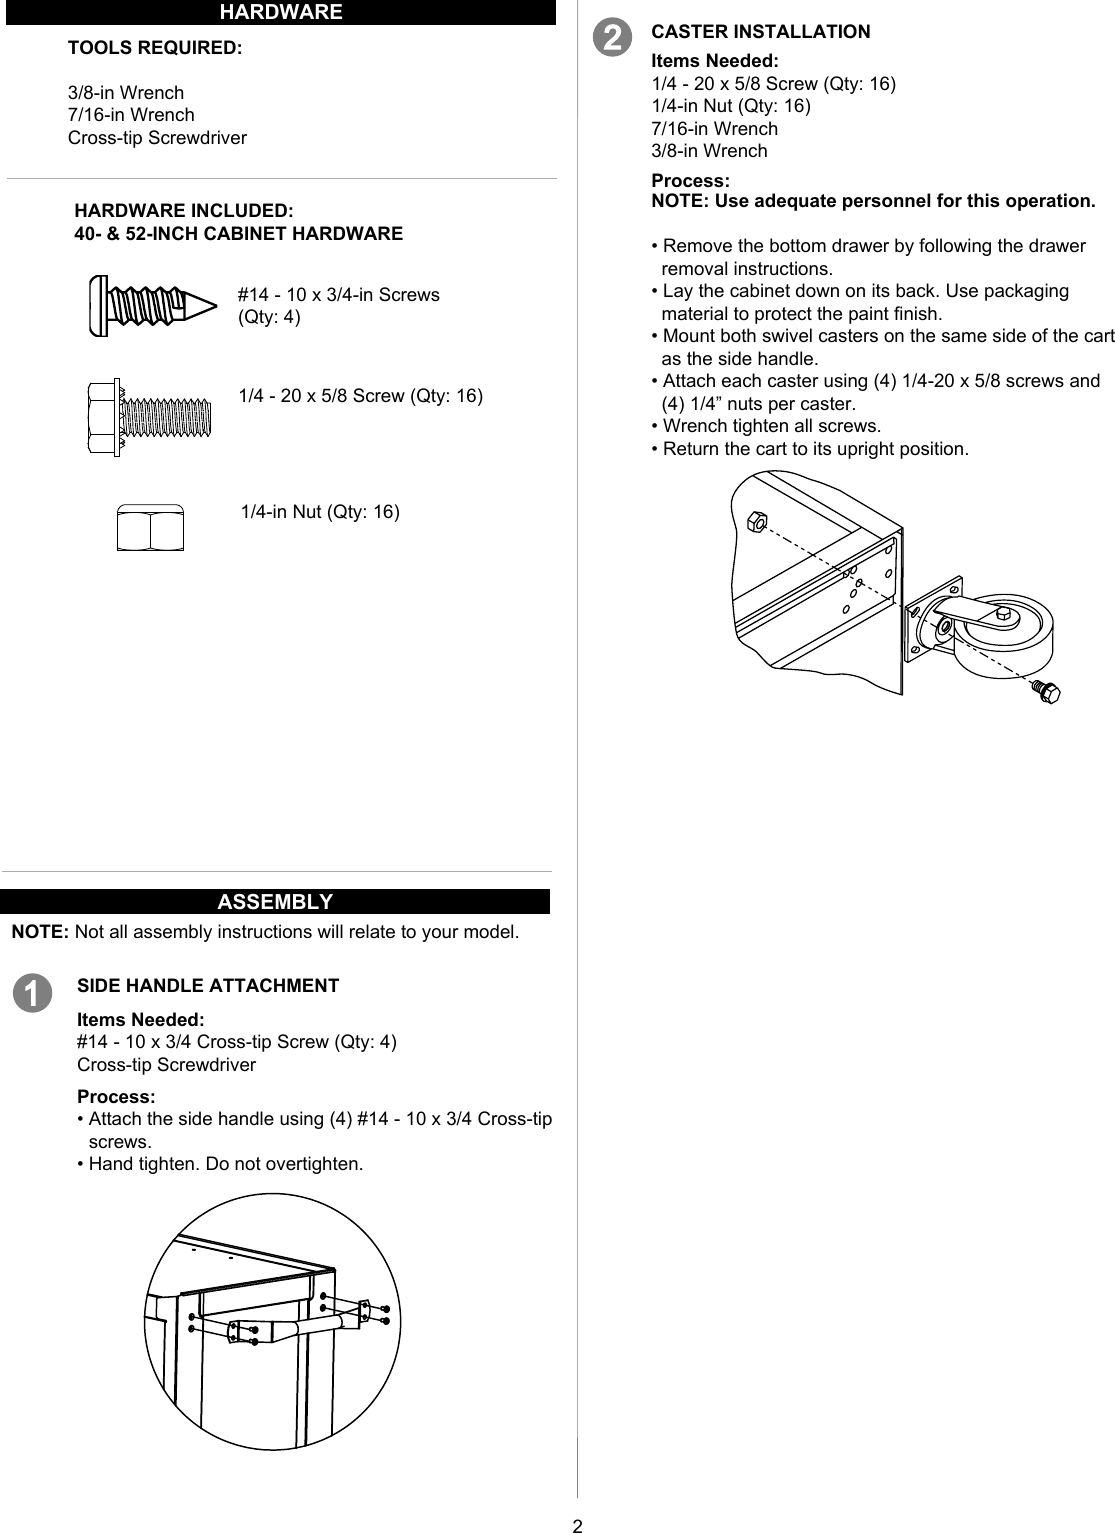 Page 2 of 8 - Craftsman 706586400 User Manual  TOOL CHEST - Manuals And Guides 1610106L